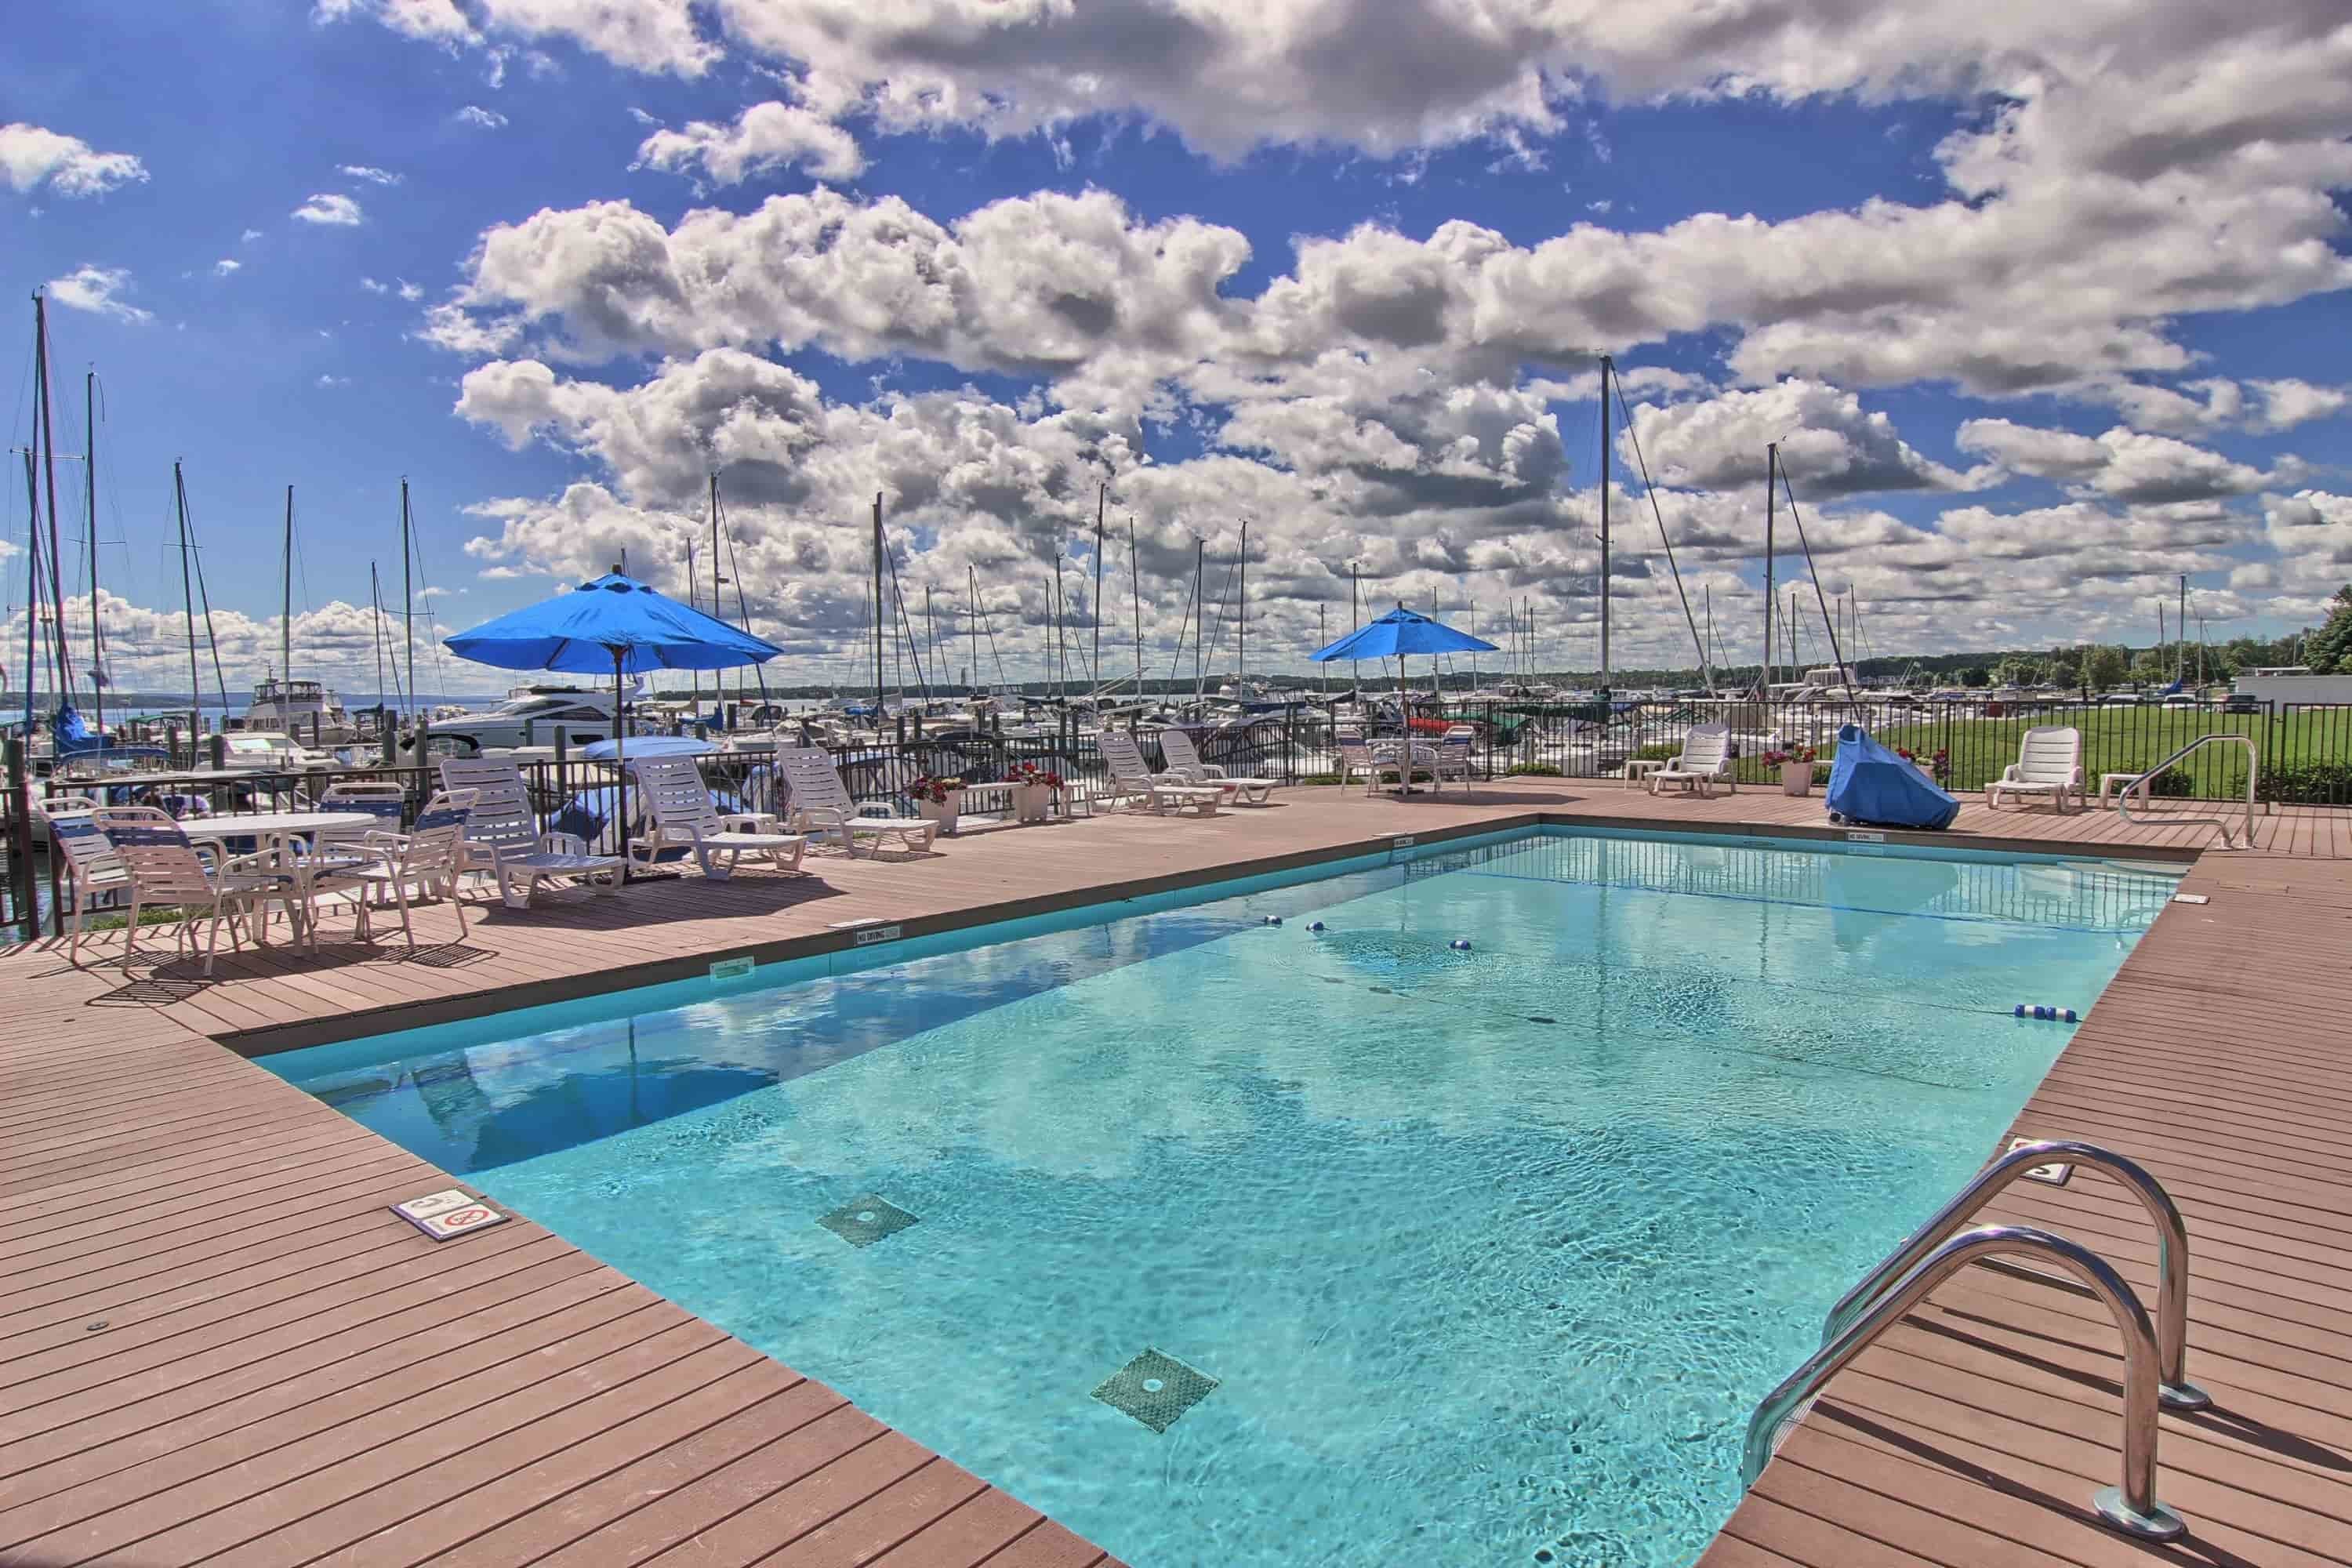 Pool at Foster Boat Works condominiums in Charlevoix, Michigan